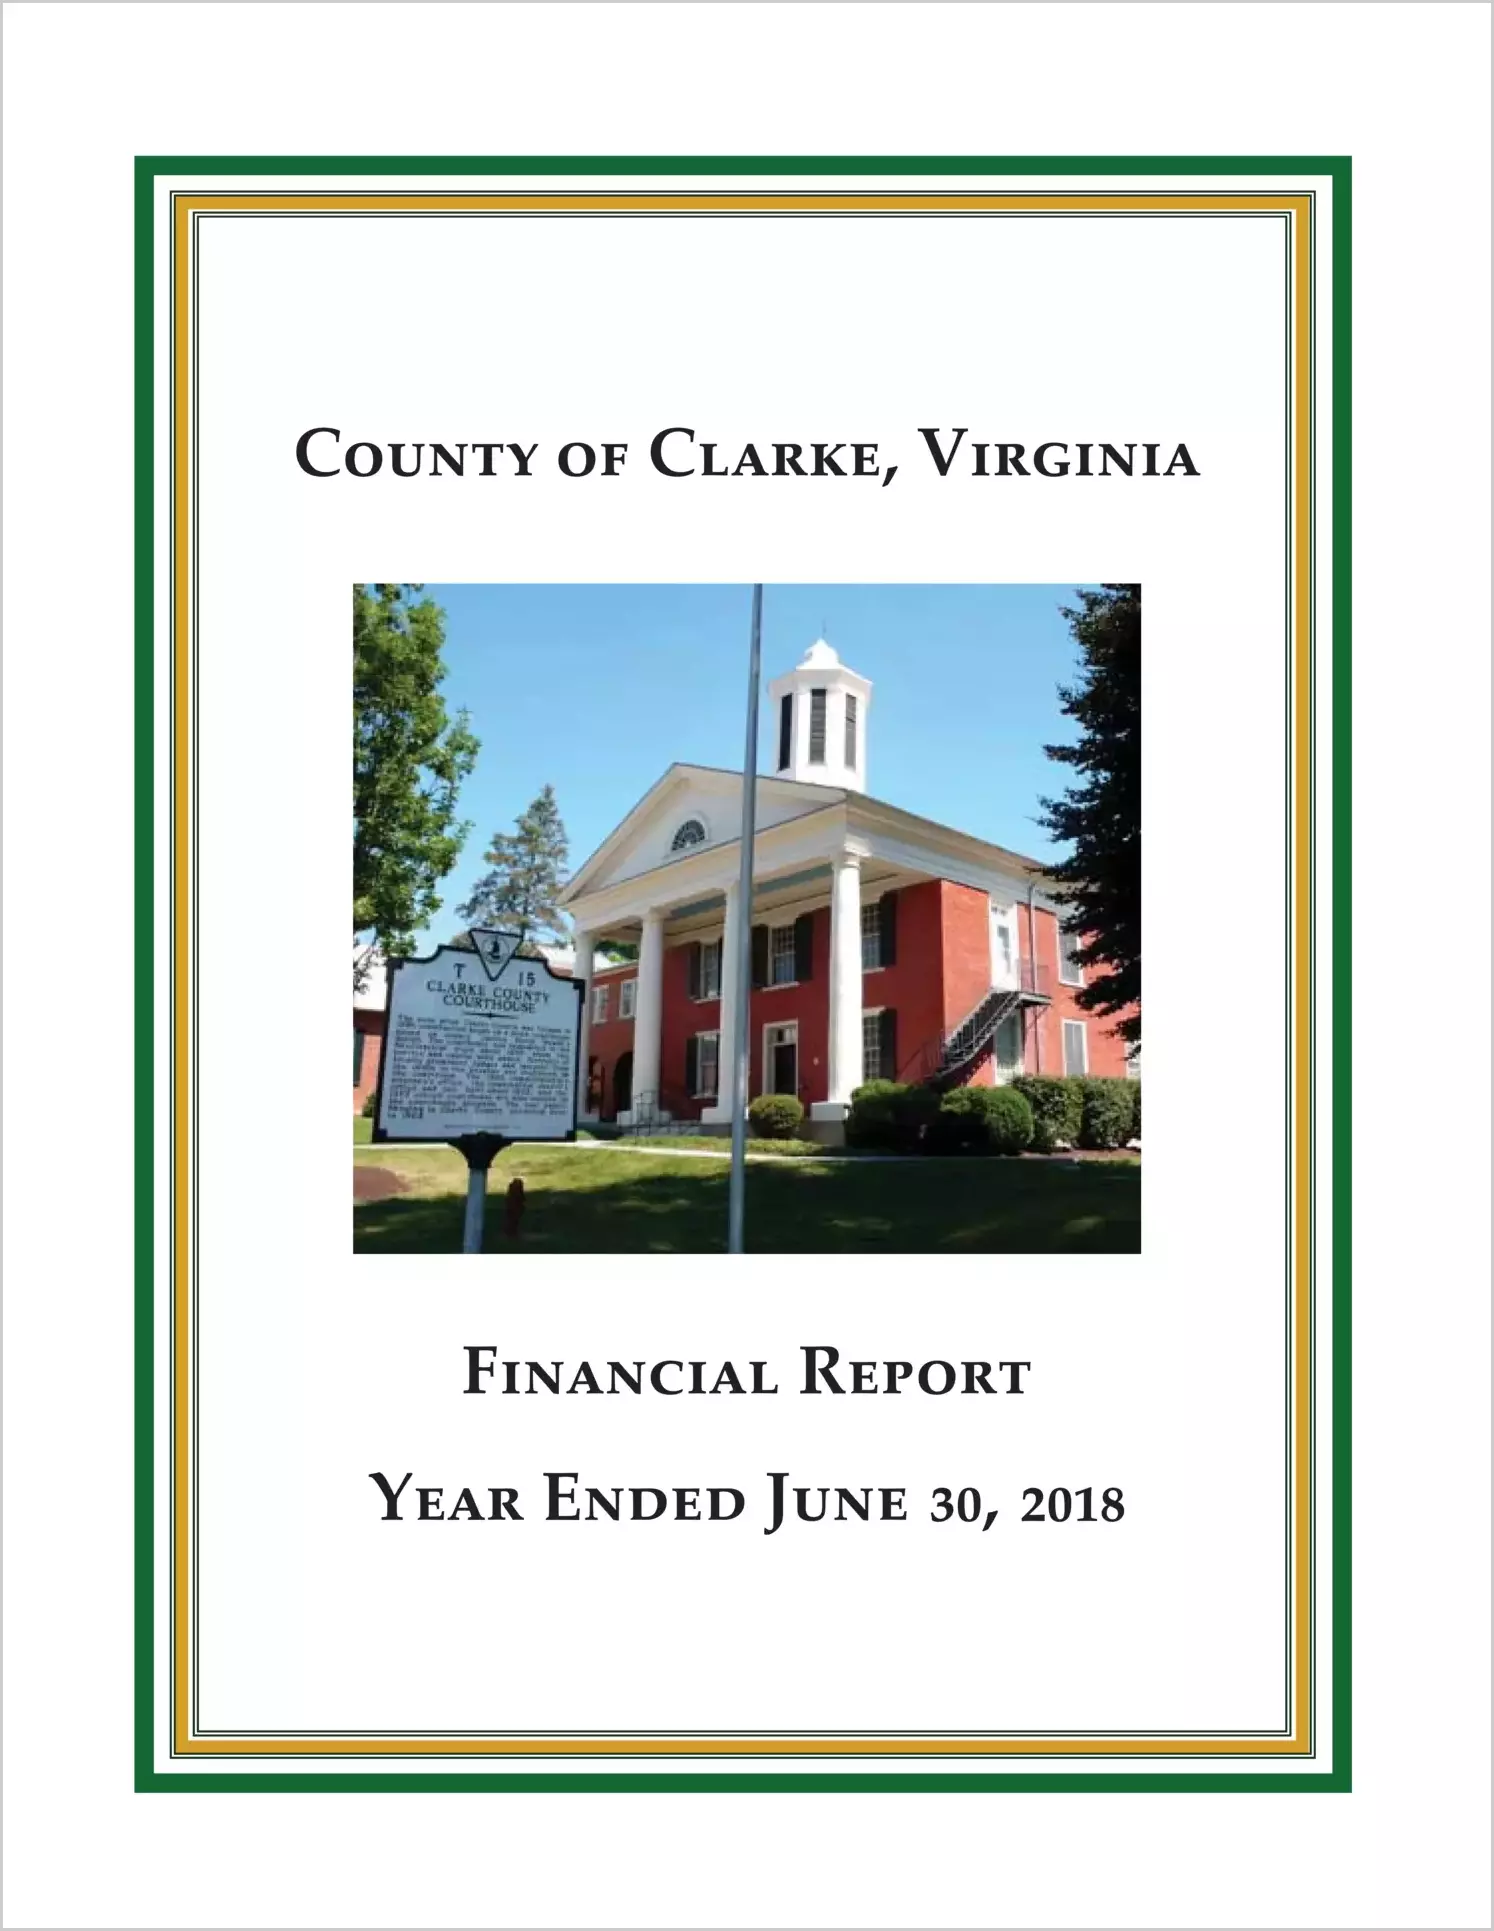 2018 Annual Financial Report for County of Clarke